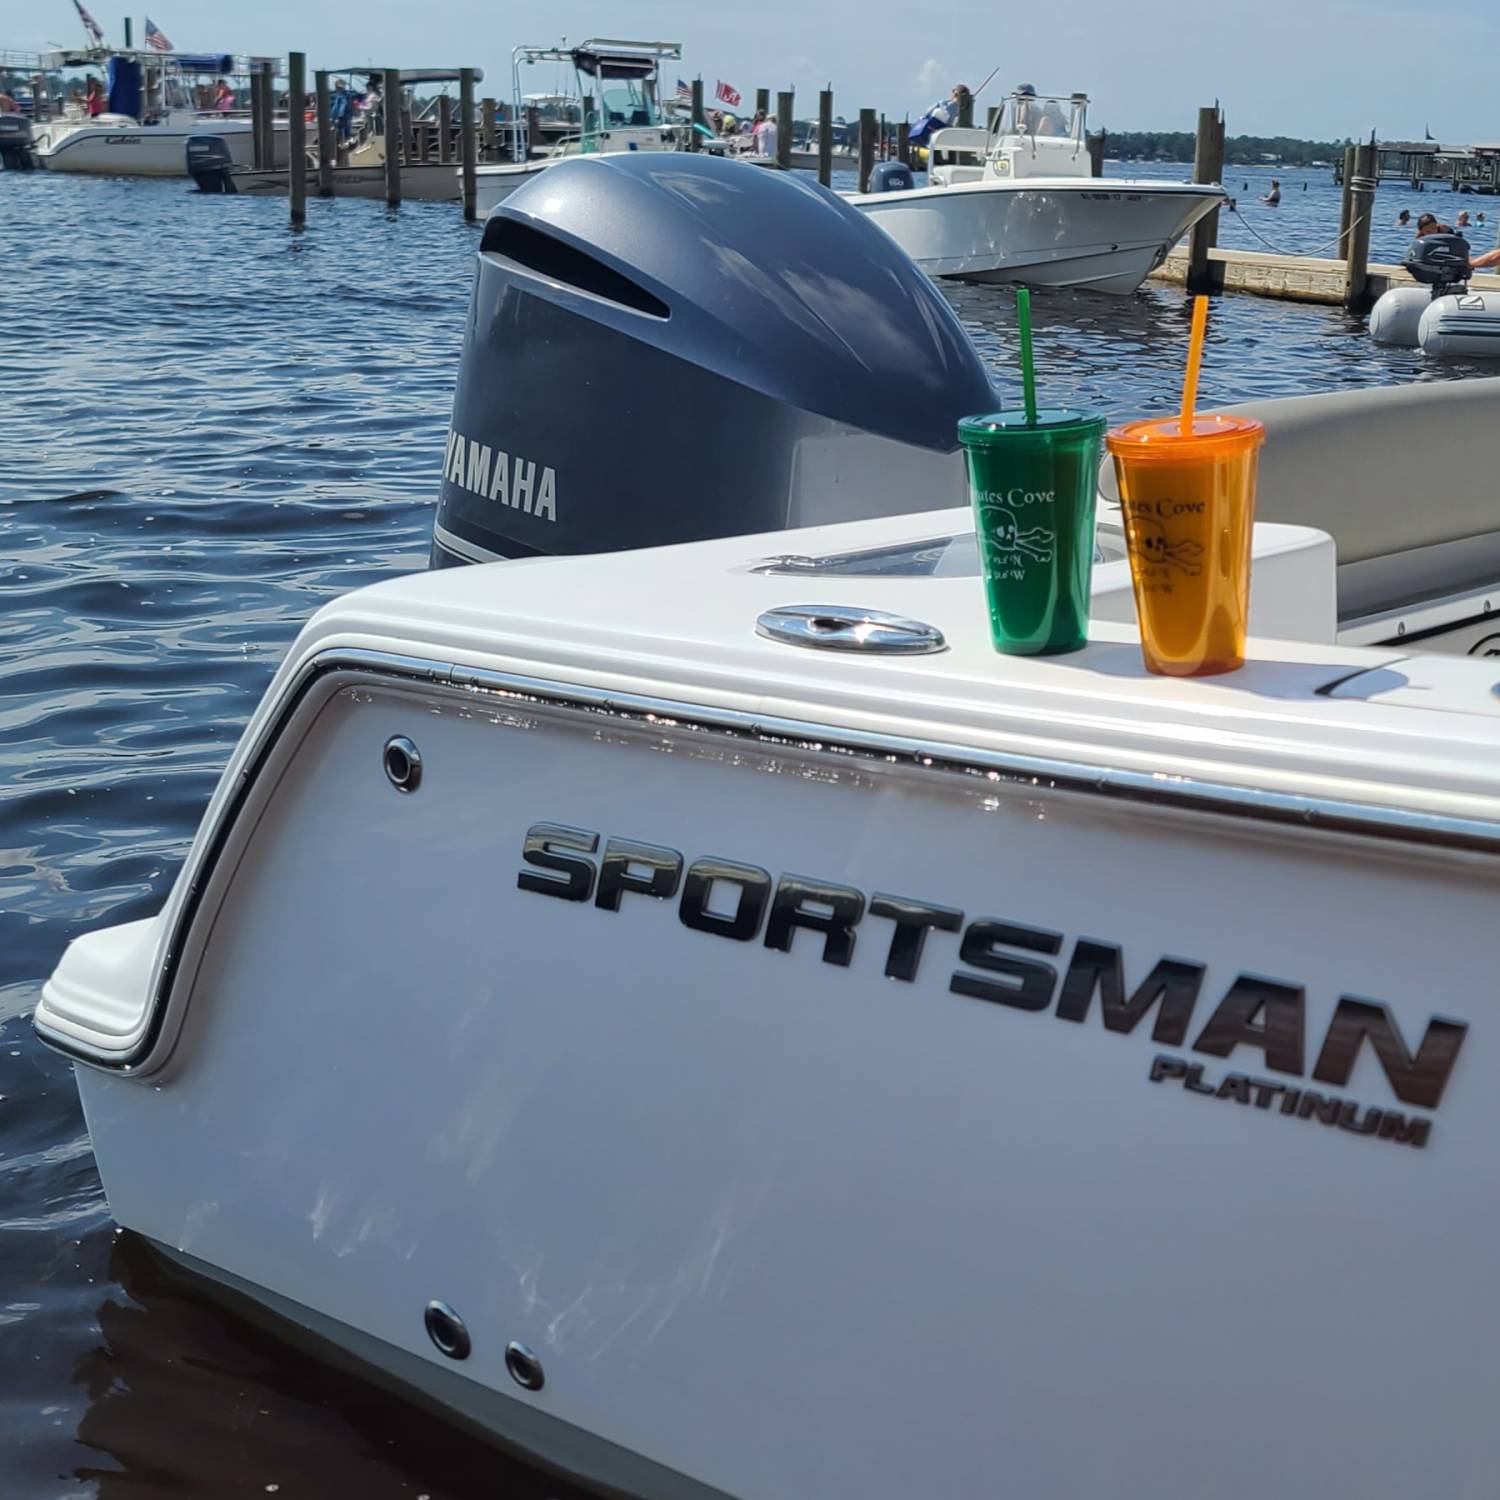 Title: Family day - On board their Sportsman Open 232 Center Console - Location: Pirates Cove. Participating in the Photo Contest #SportsmanFebruary2022